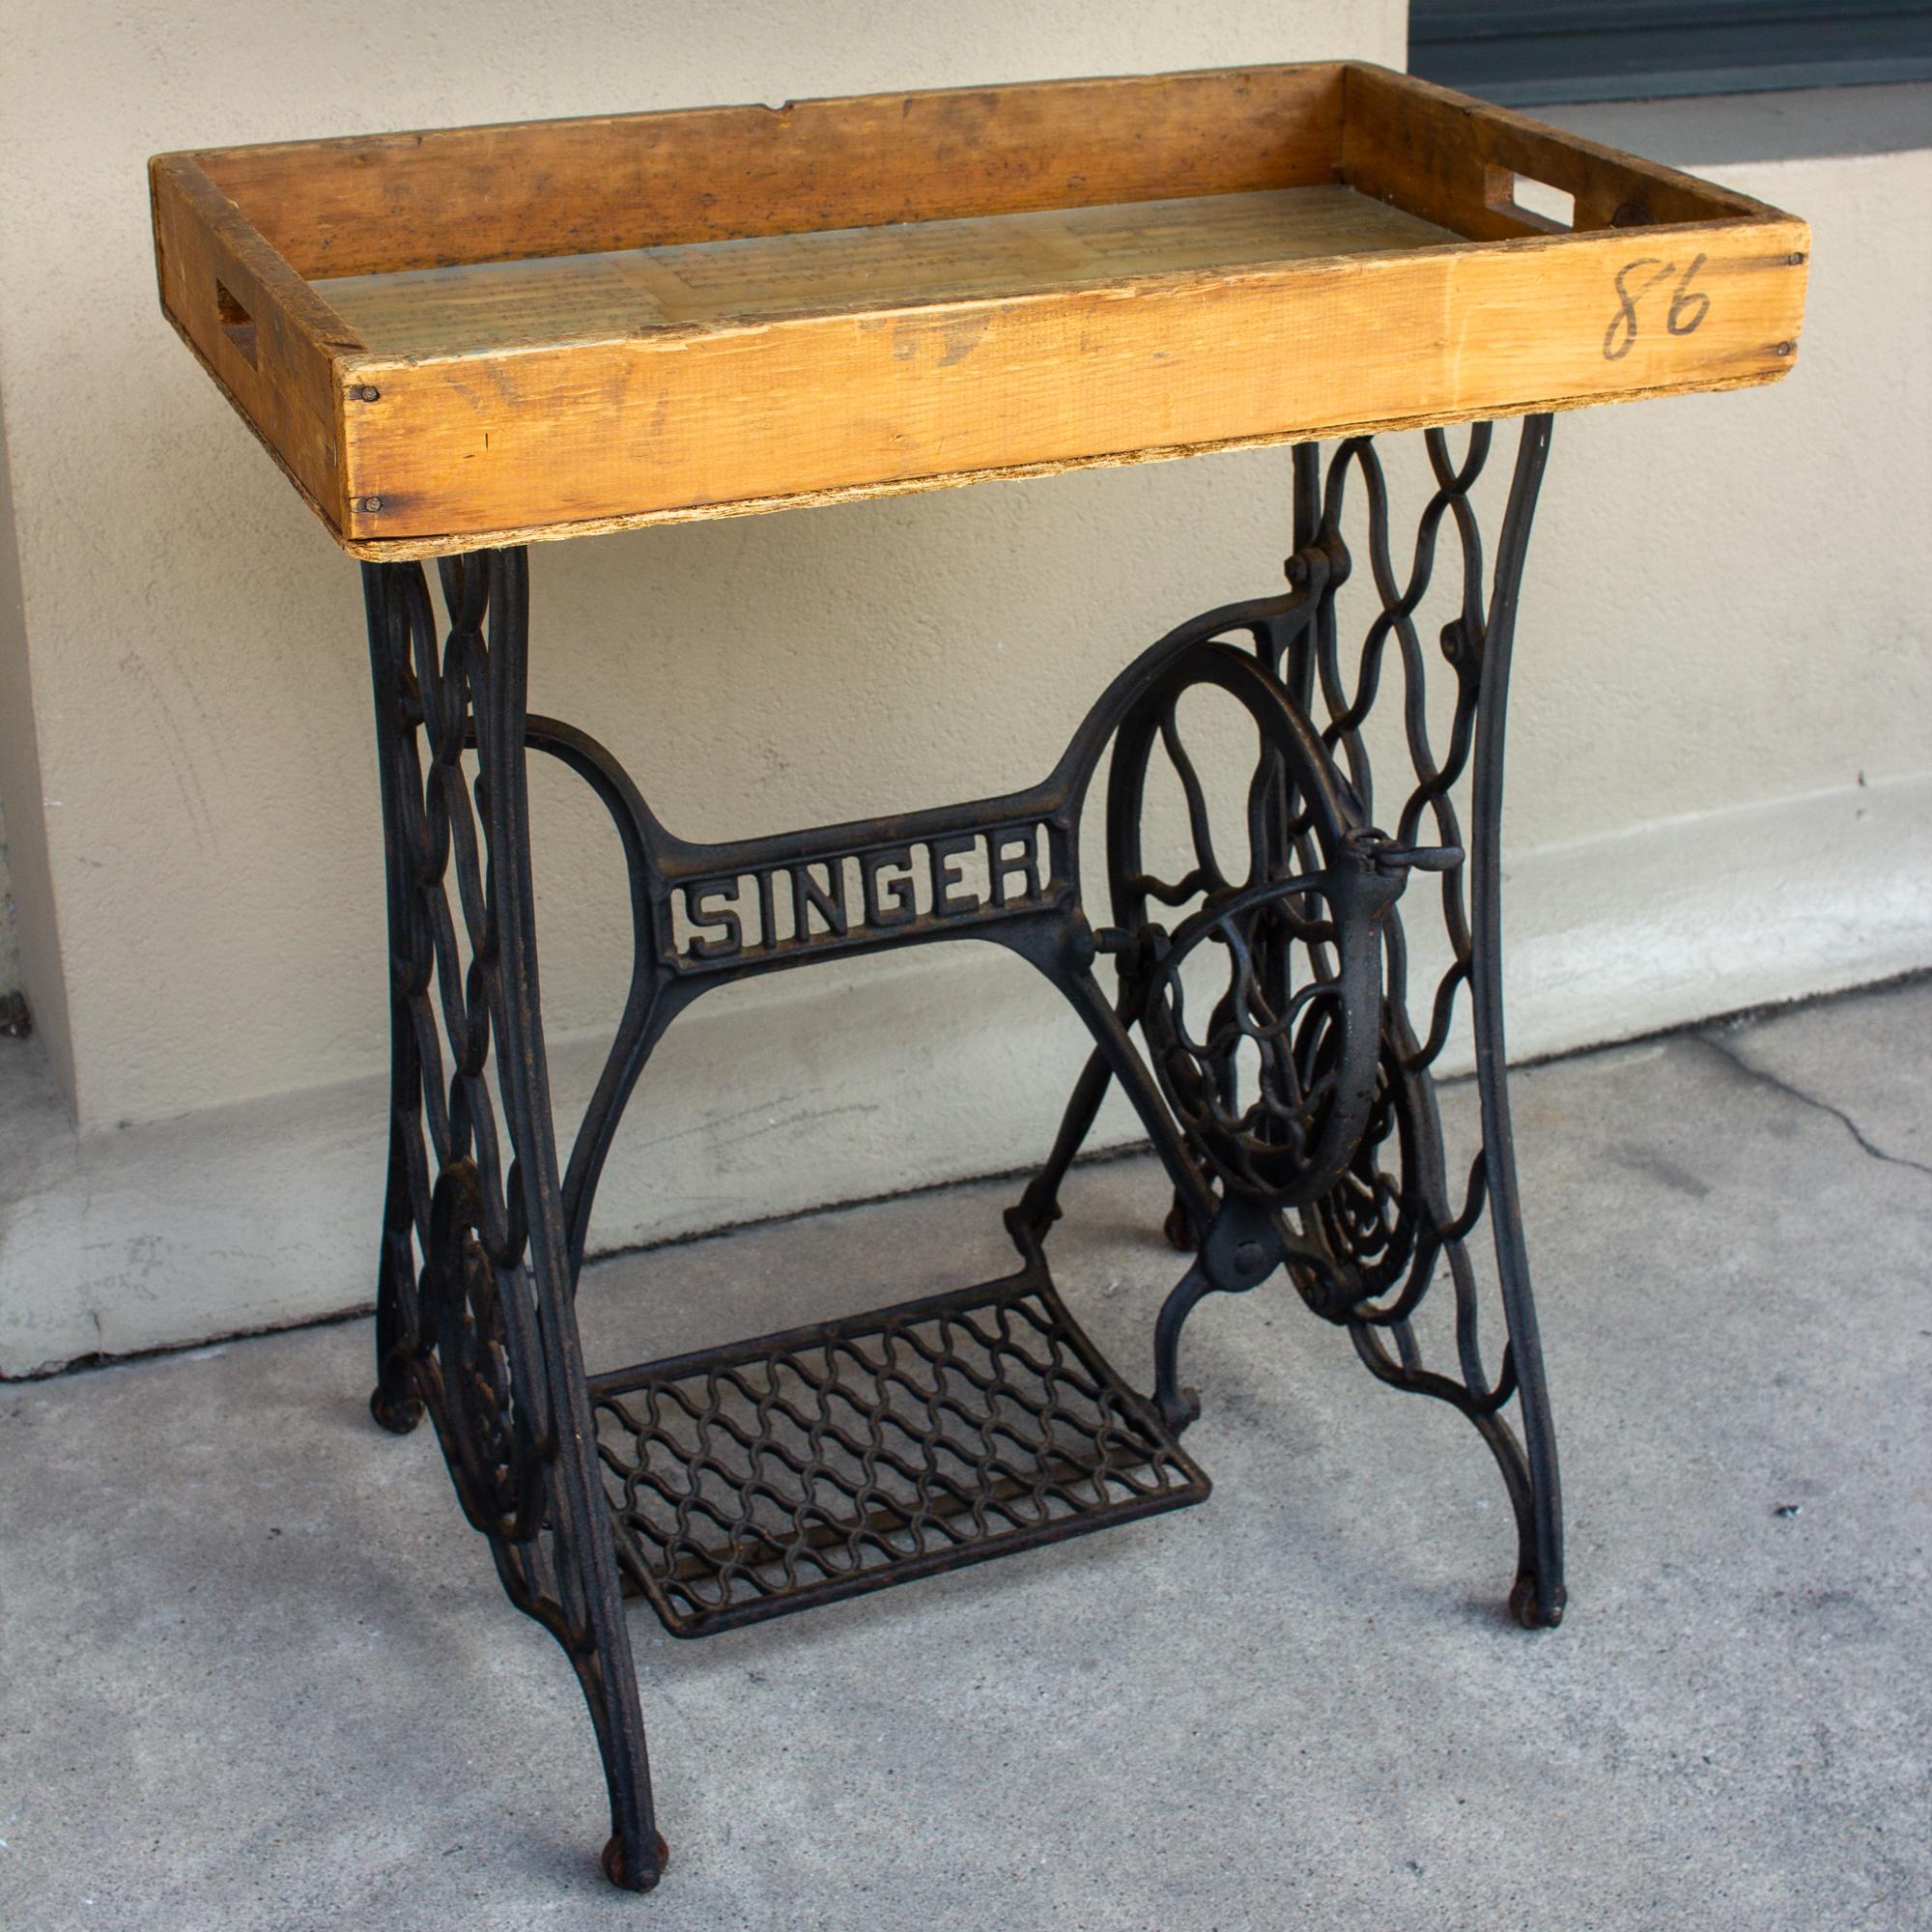 Truly a treasure from our travels, this antique iron Singer sewing machine base as been combined with a breakmaker's handcrafted wood tray then inlaid with vintage sheet music and topped with glass. The tray is removable and includes handles and